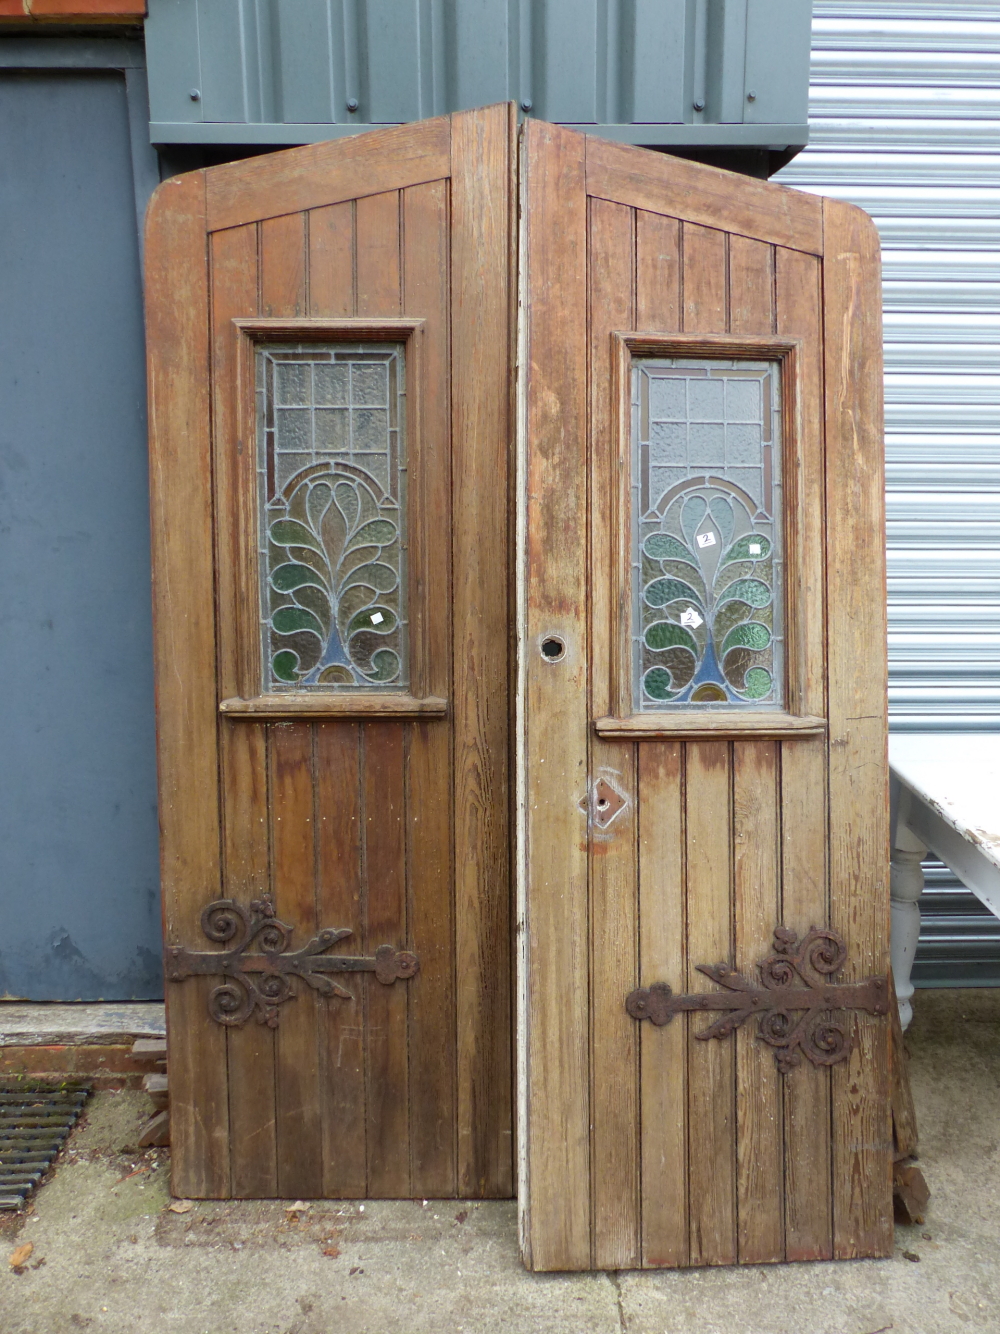 A PAIR OF GOTHIC OAK DOORS WITH FAUX STRAP HINGES AND STAINED GLASS PANELS COMPLETE WITH SURROUND. - Image 2 of 11